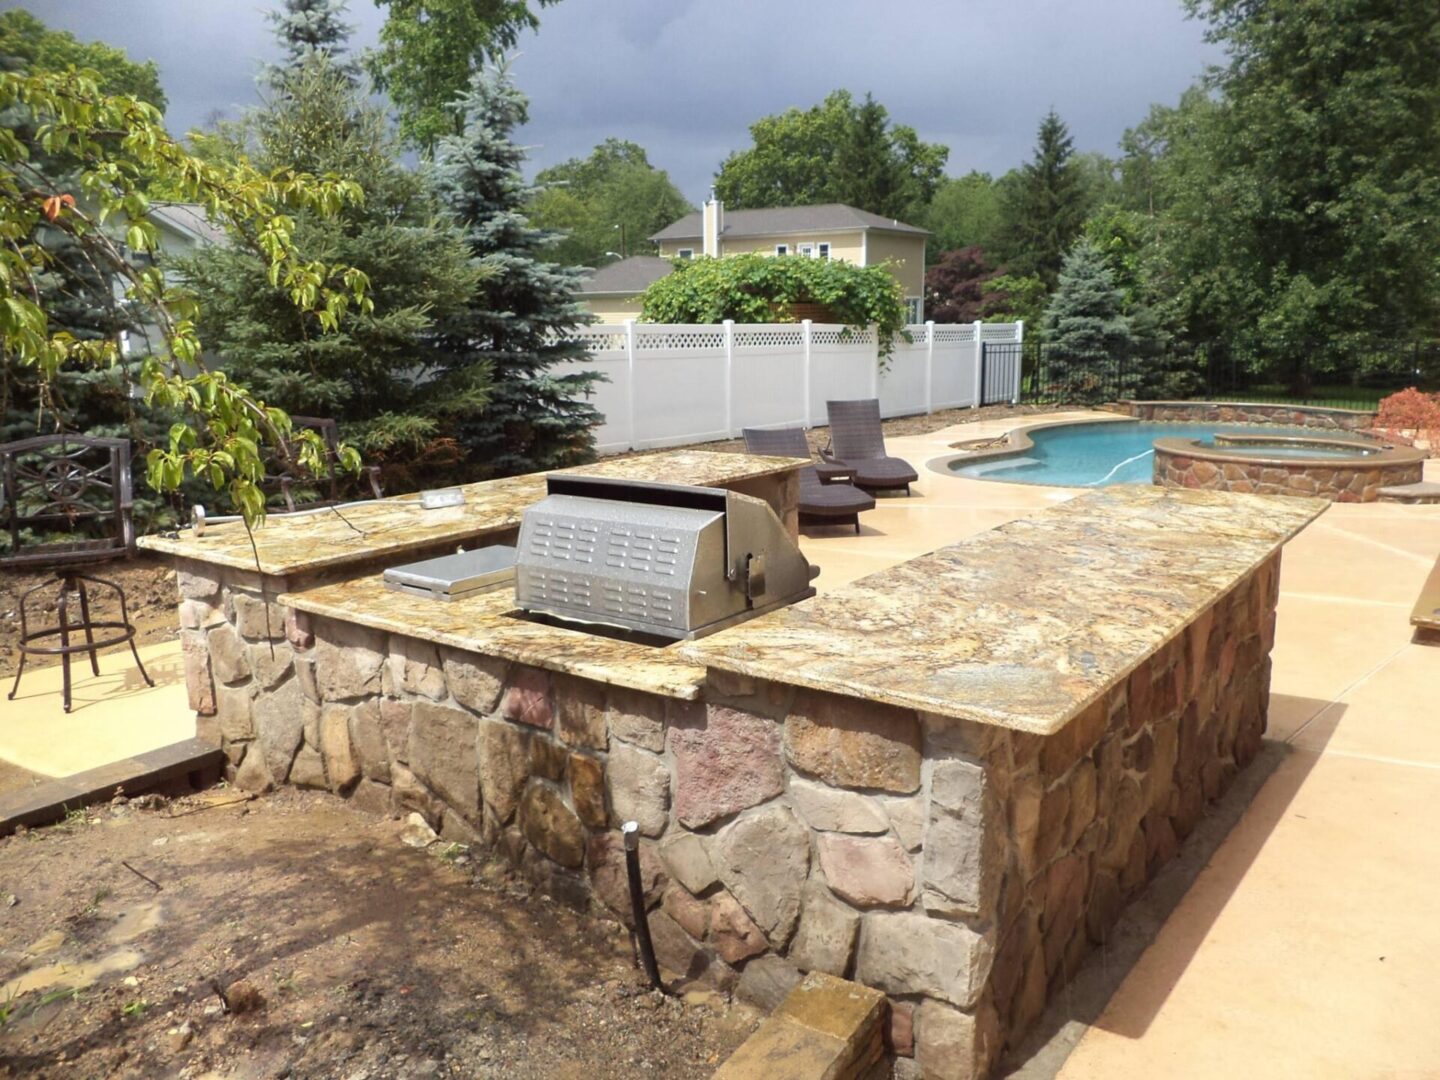 A stone wall with a grill and pool in the middle of it.